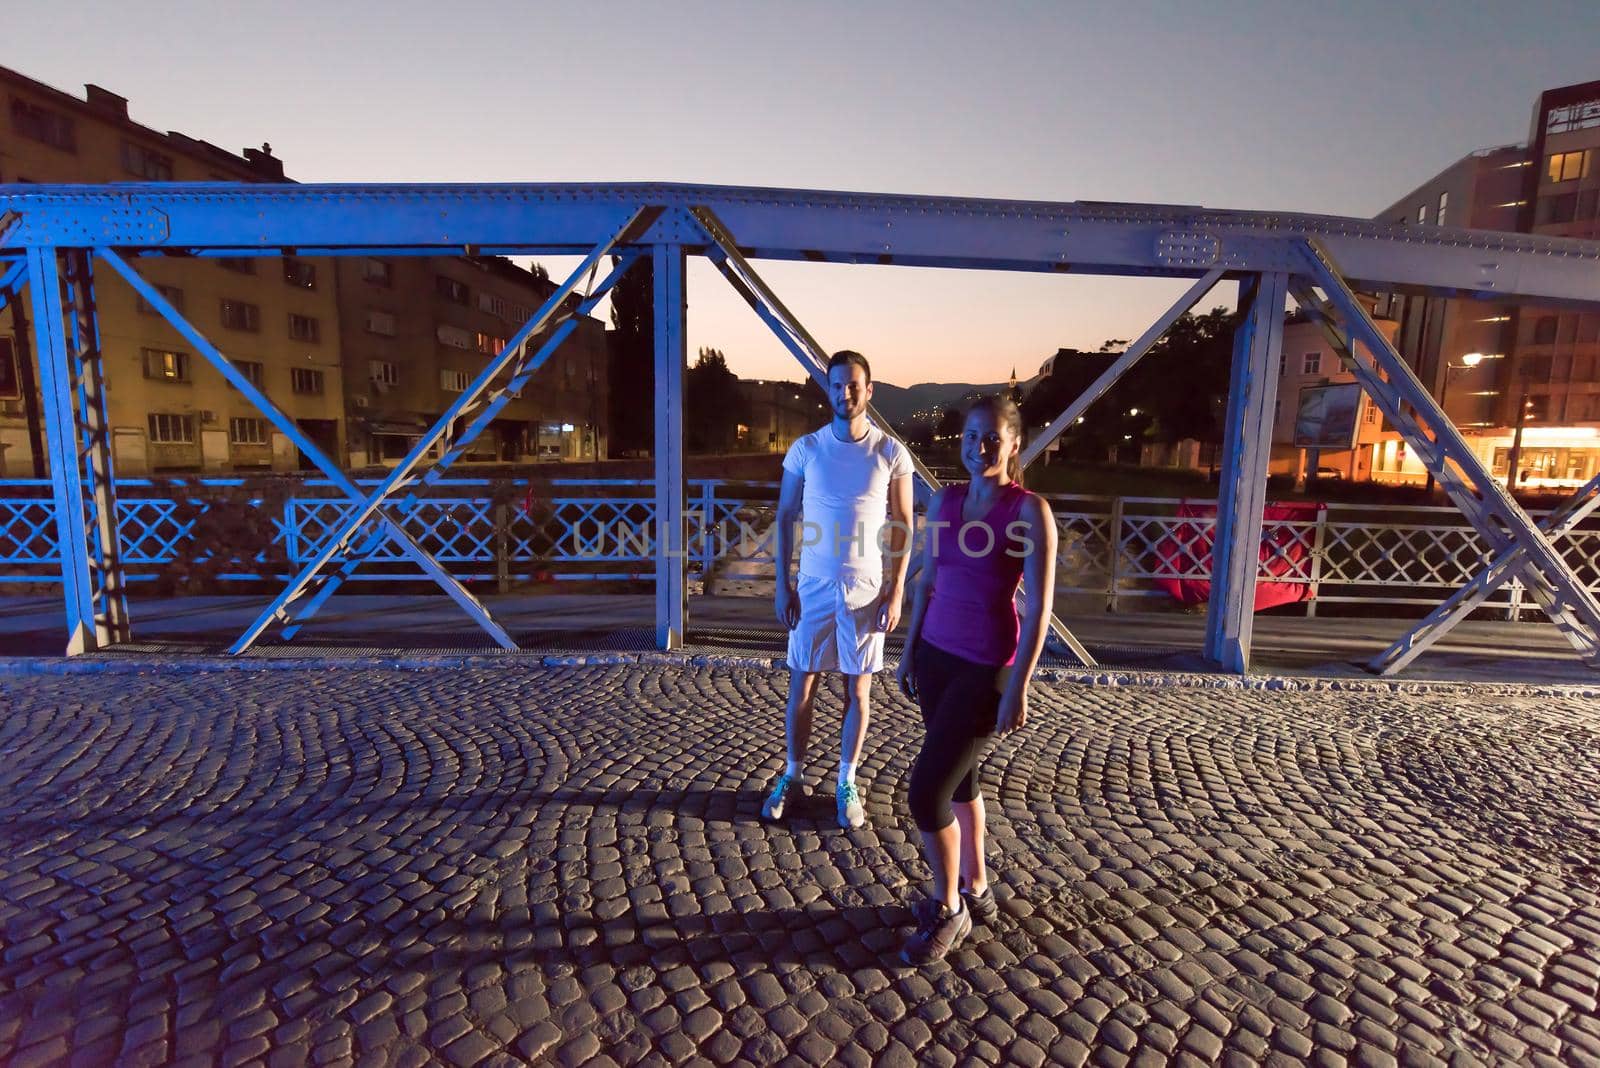 urban sports, healthy couple jogging across the bridge in the city at early morning in night